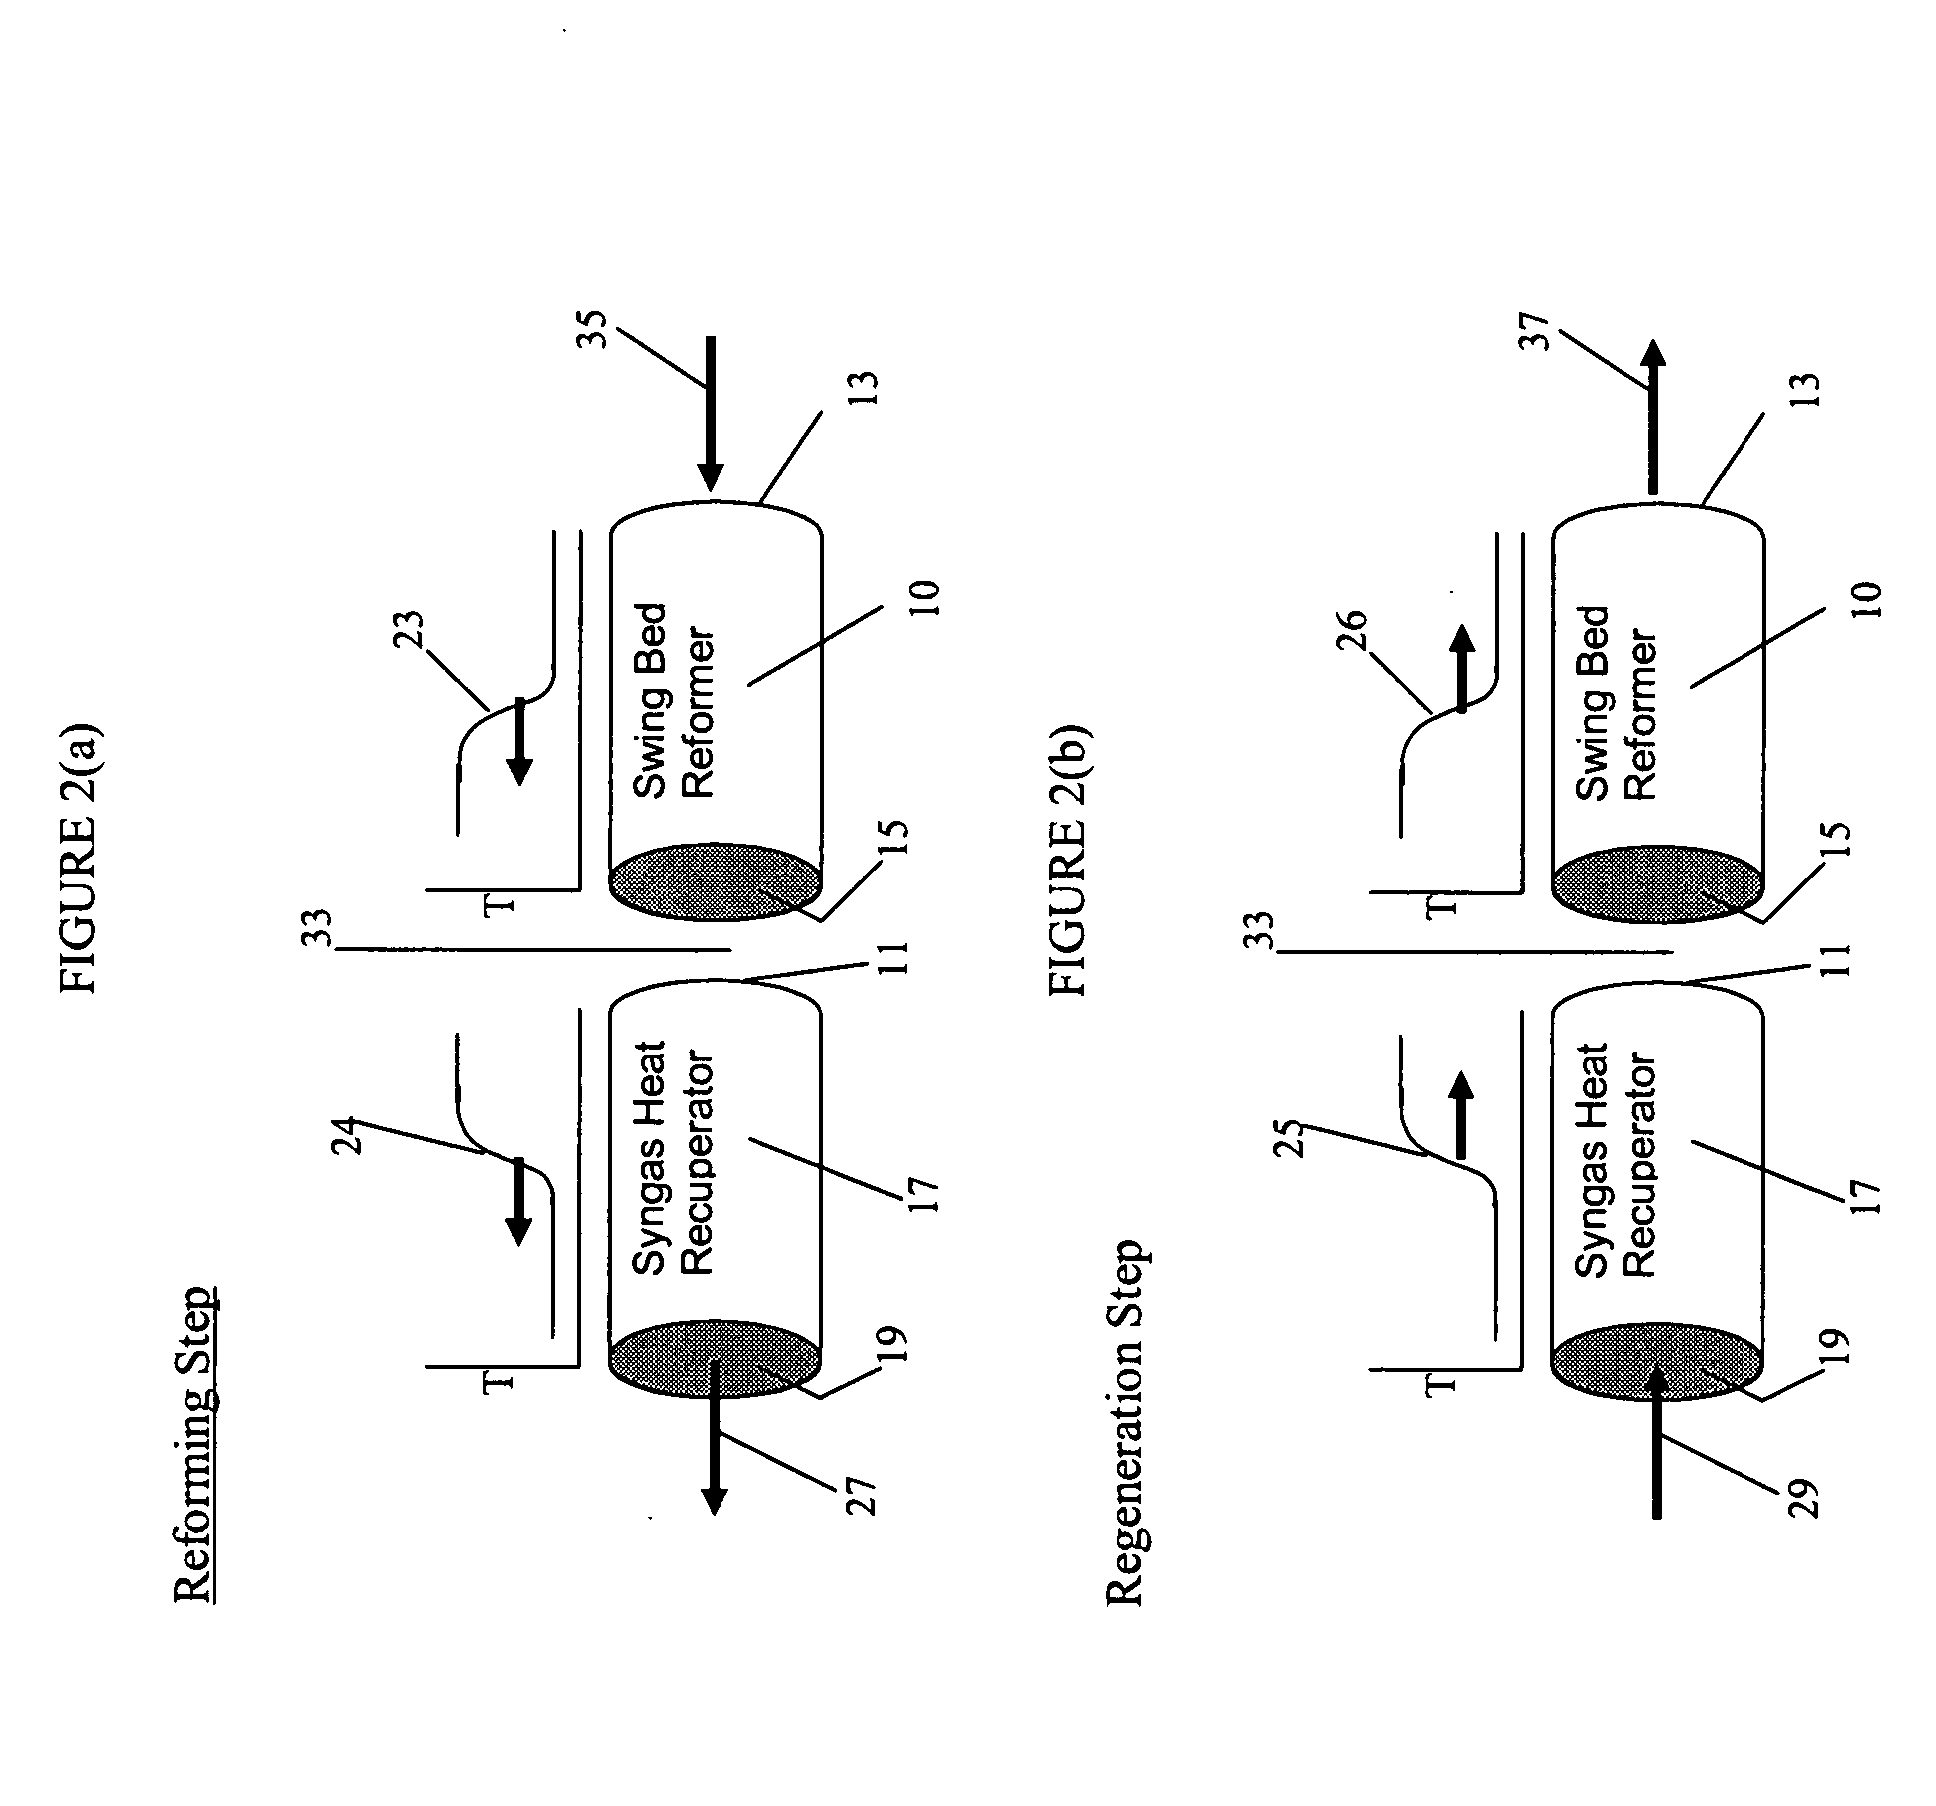 Fuel cell fuel processor with hydrogen buffering and staged membrane